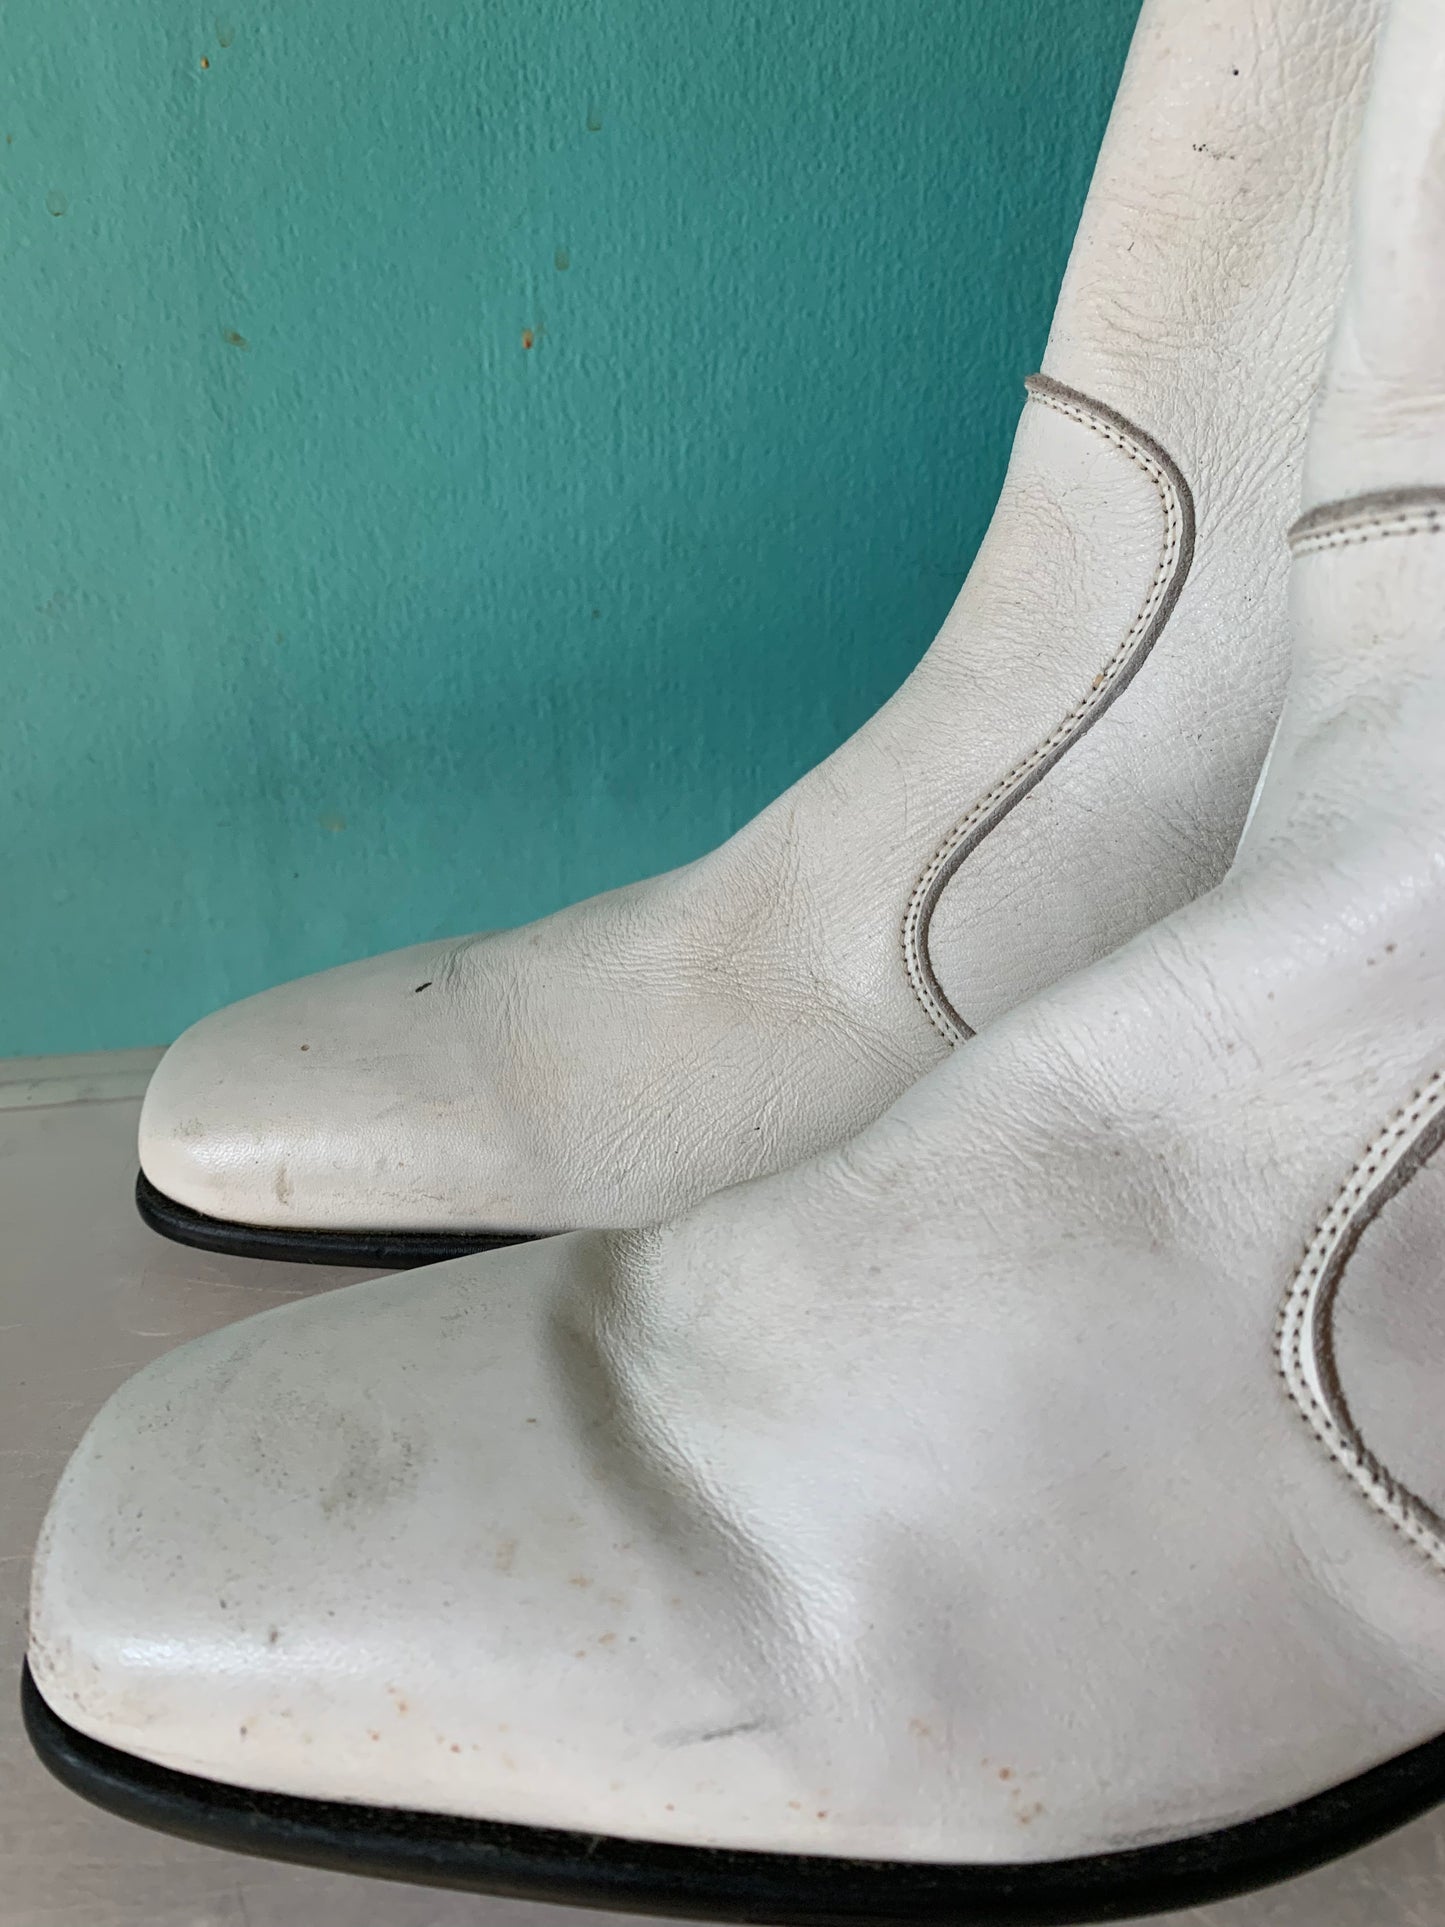 White Leather Zip Side Chelsea Boots circa 1960s M US 8 W US 10